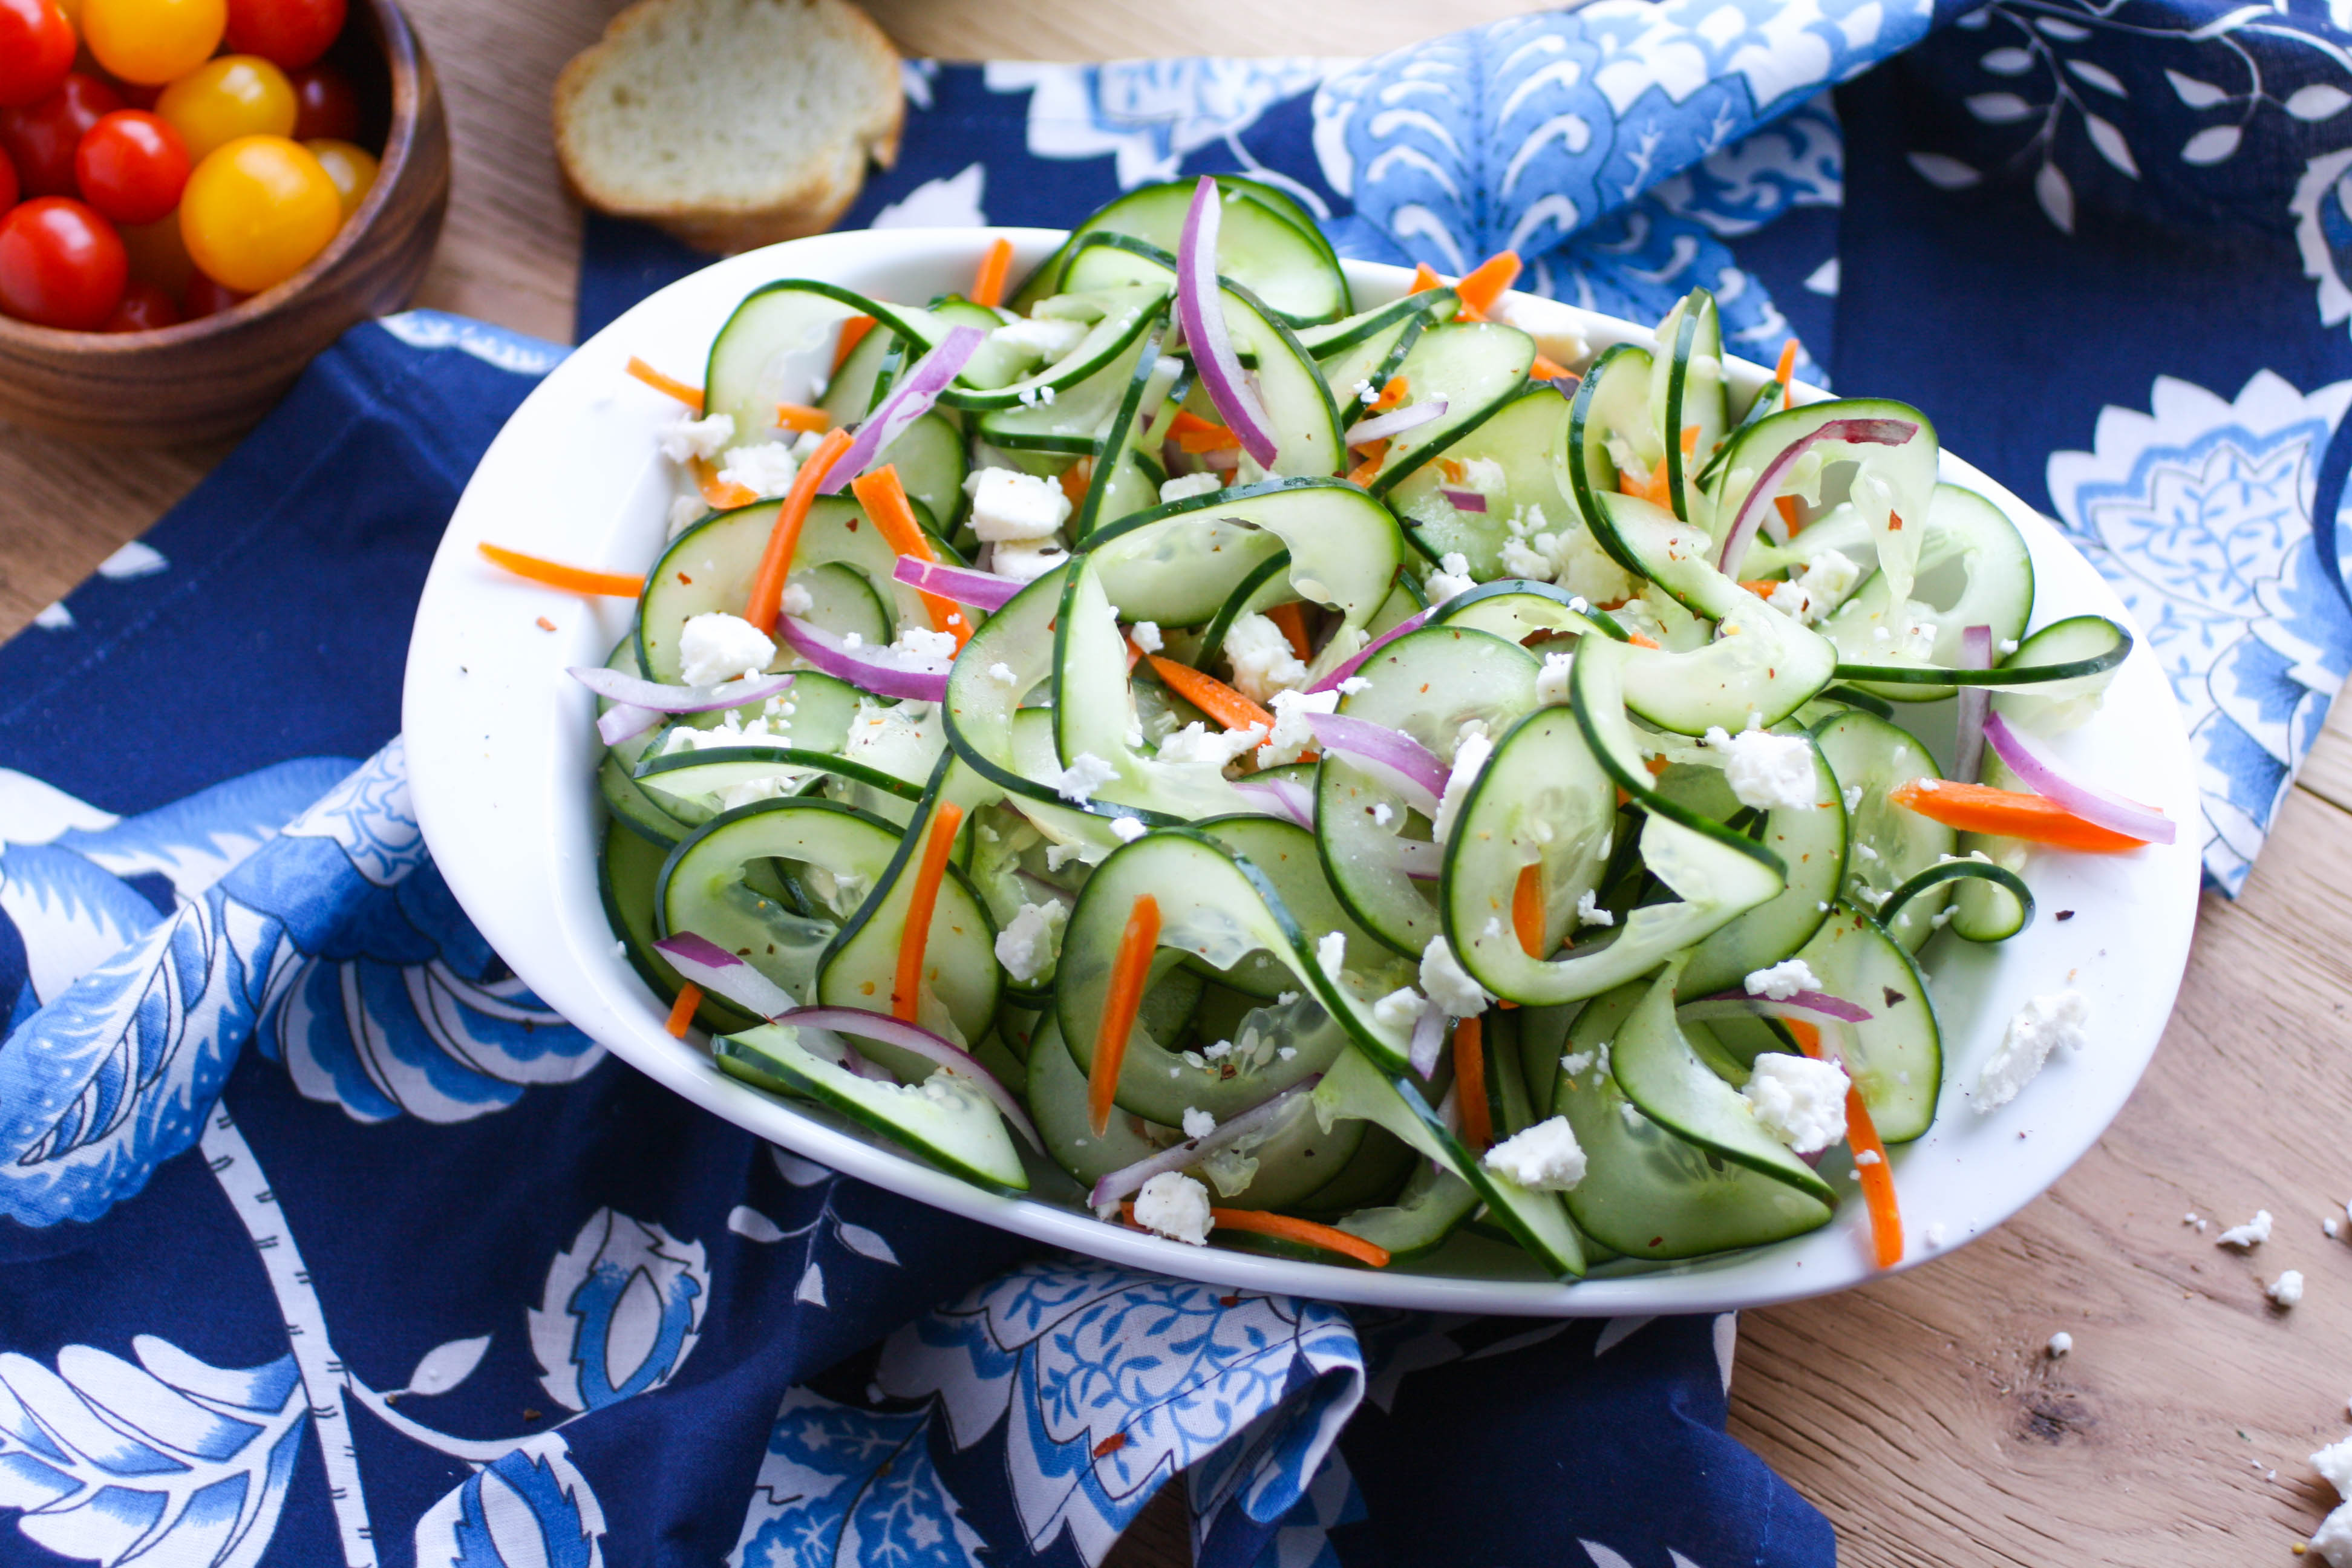 Sweet and Tangy Cucumber Ribbon Salad is a treat anytime. This salad is easy to make and the ribbons are a fun twist!